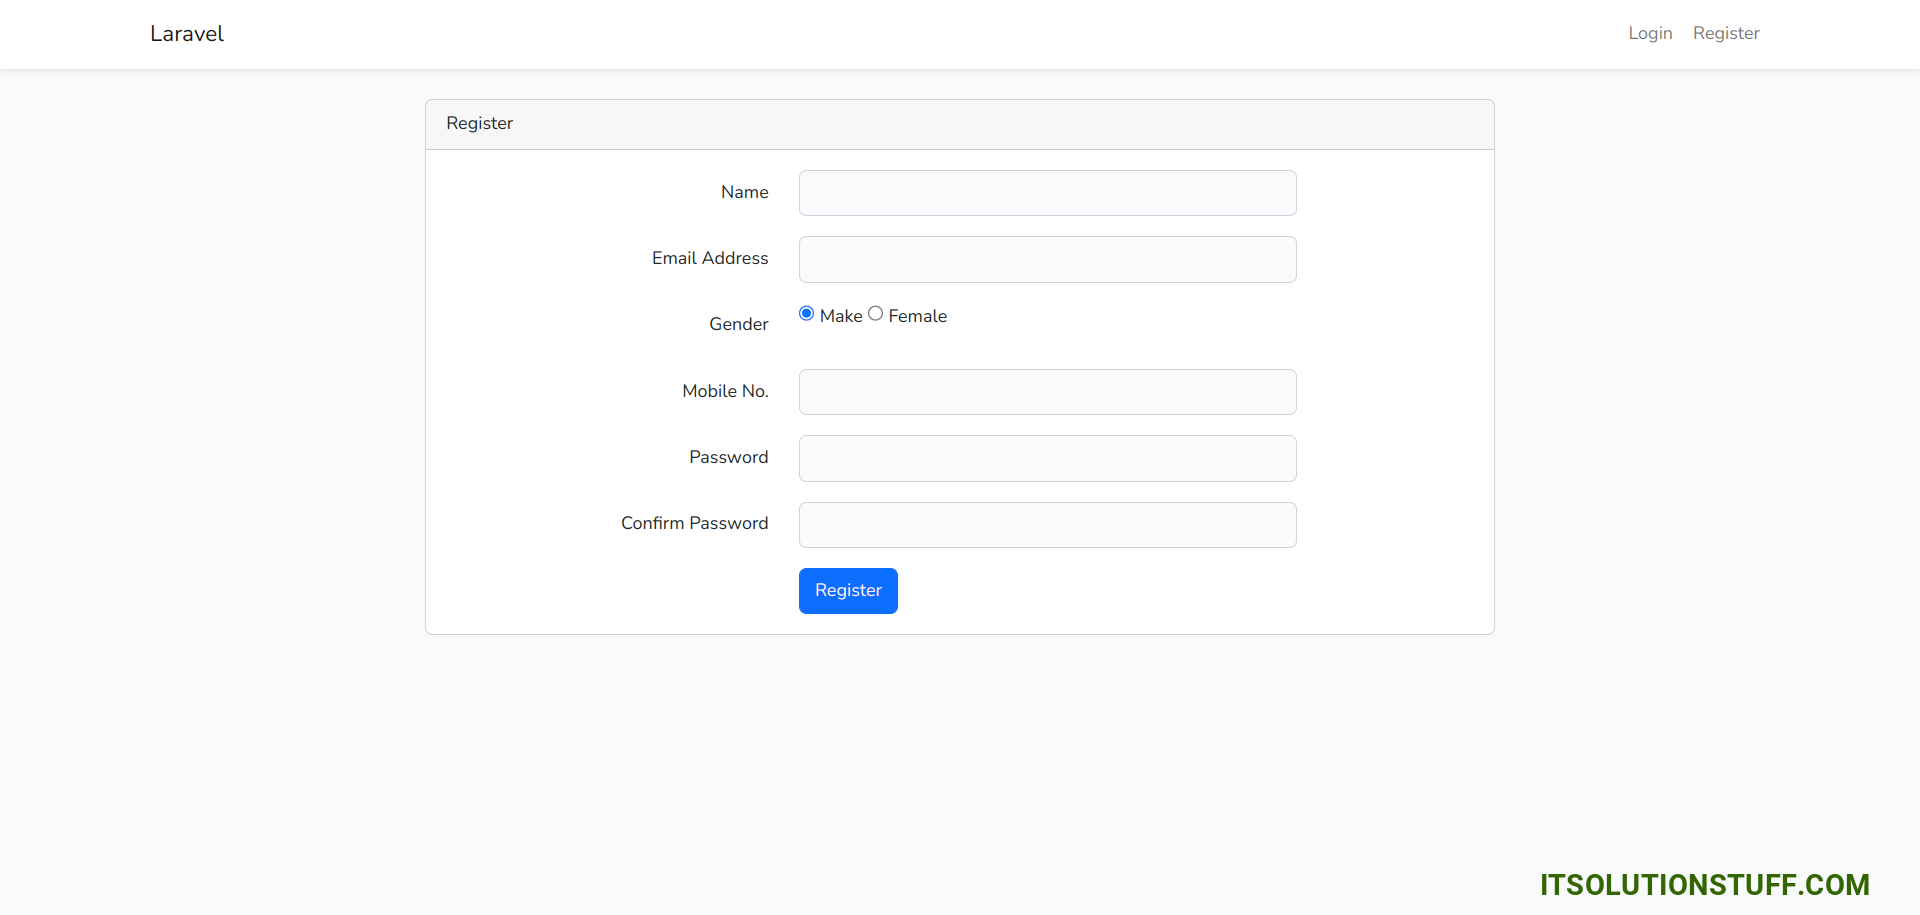 How to Add Extra Field in Registration Form in Laravel?